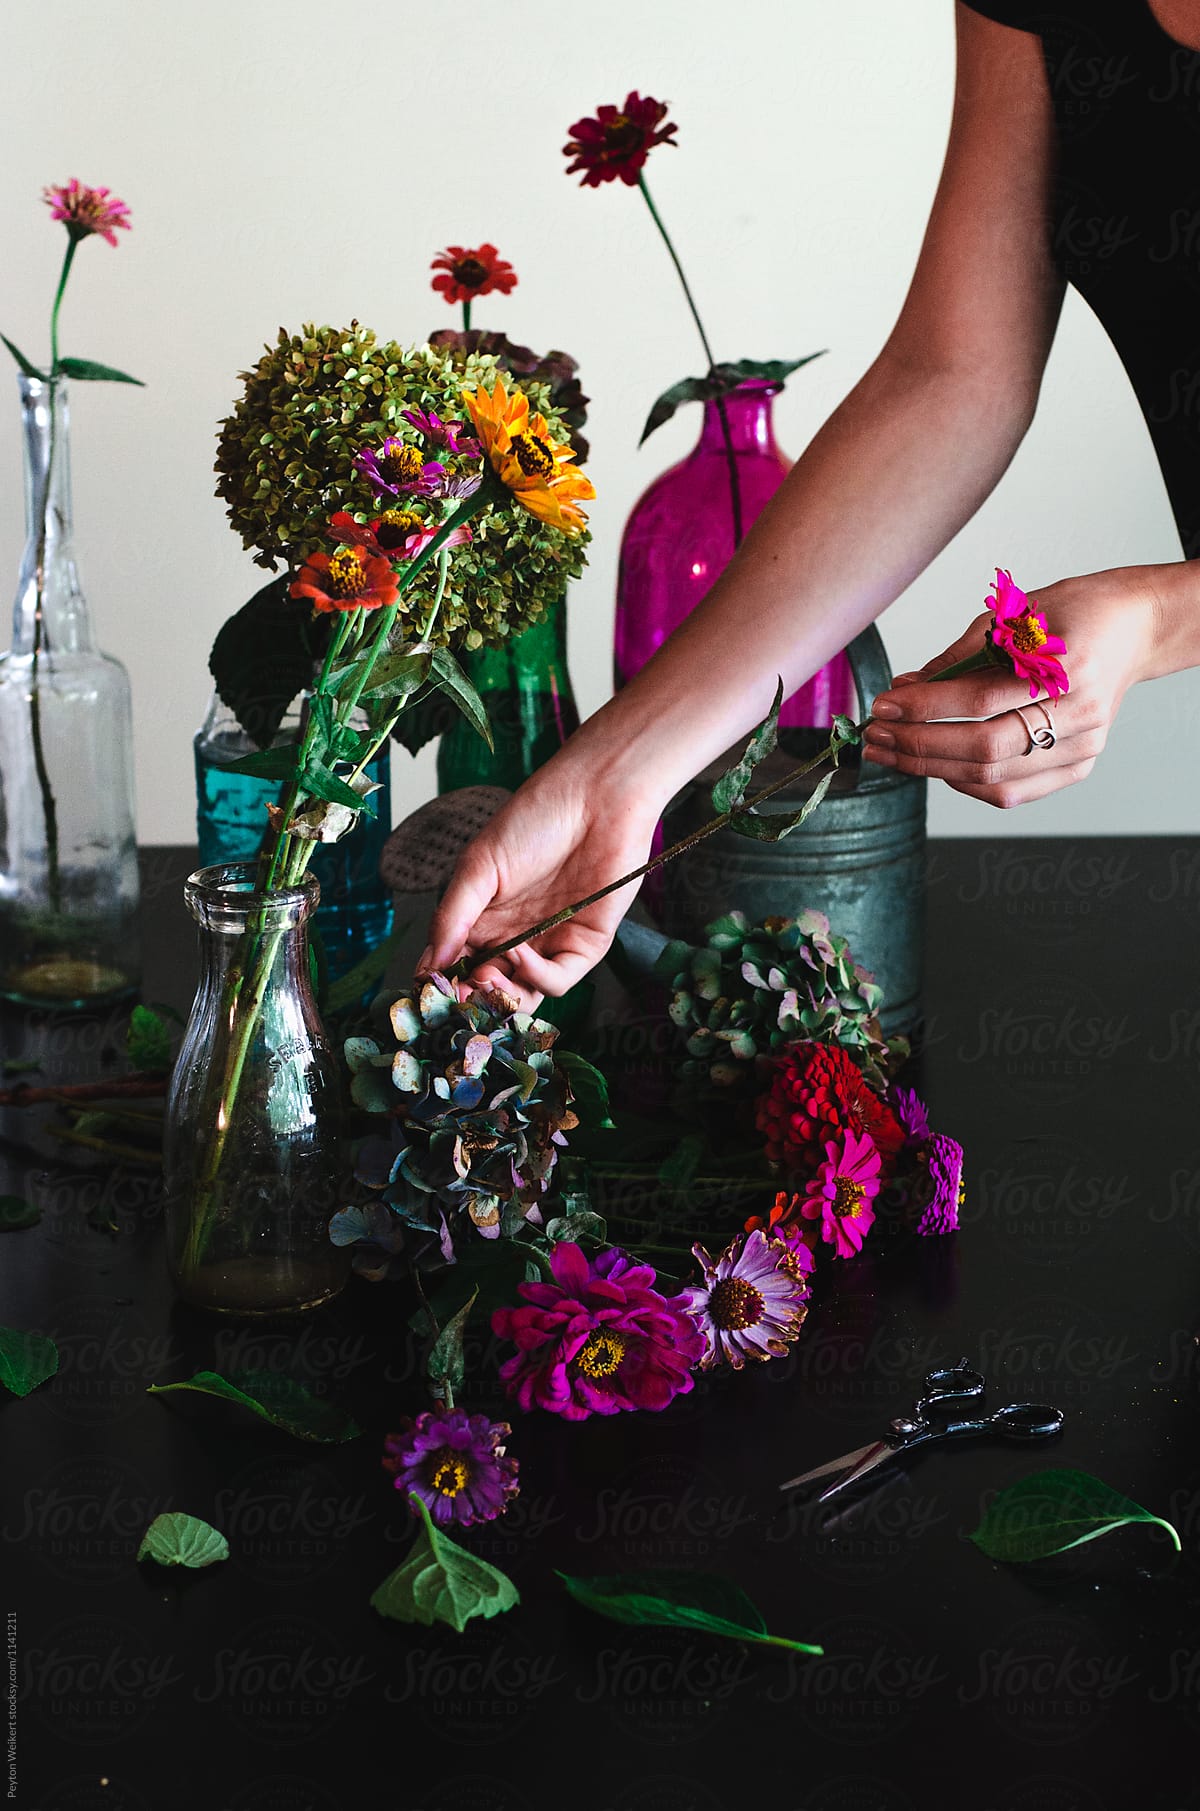 Florist Clipping Zinnias and Hydrangeas to Make Bouquets